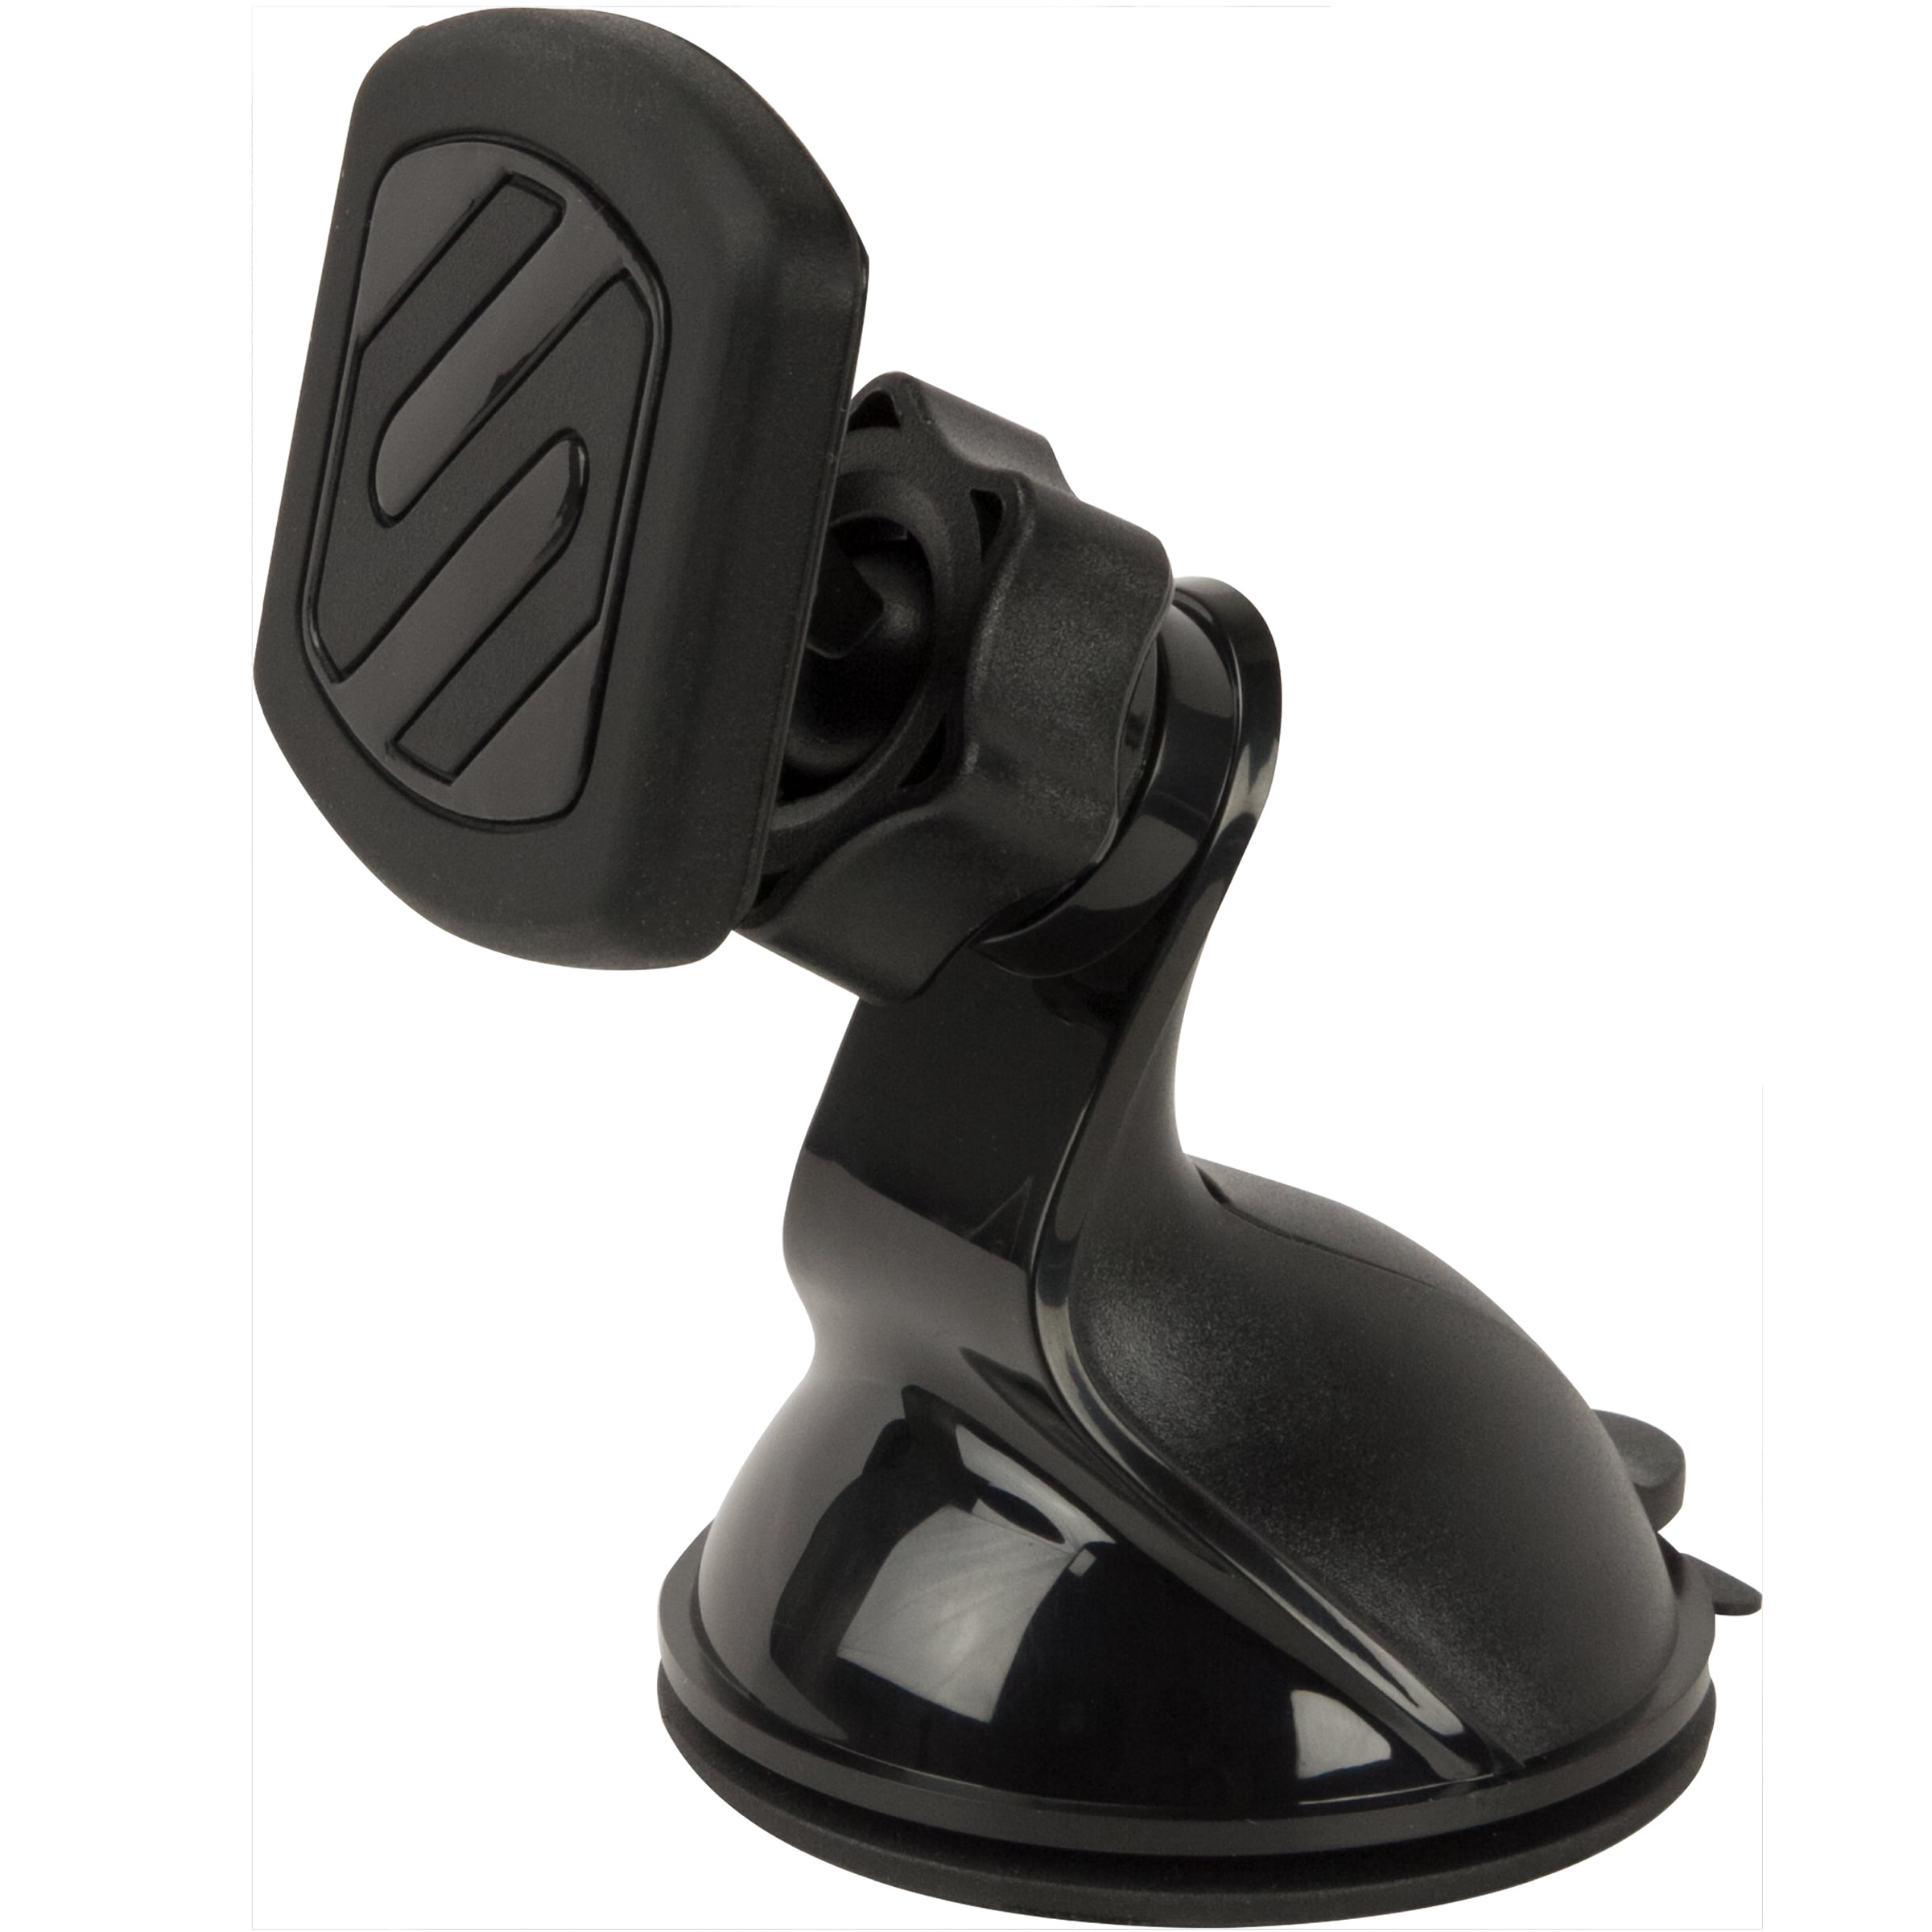 Car Phone Holder Magnetic phone mount for windshield works with ALL phones and GPS mount MagicGrip mg 